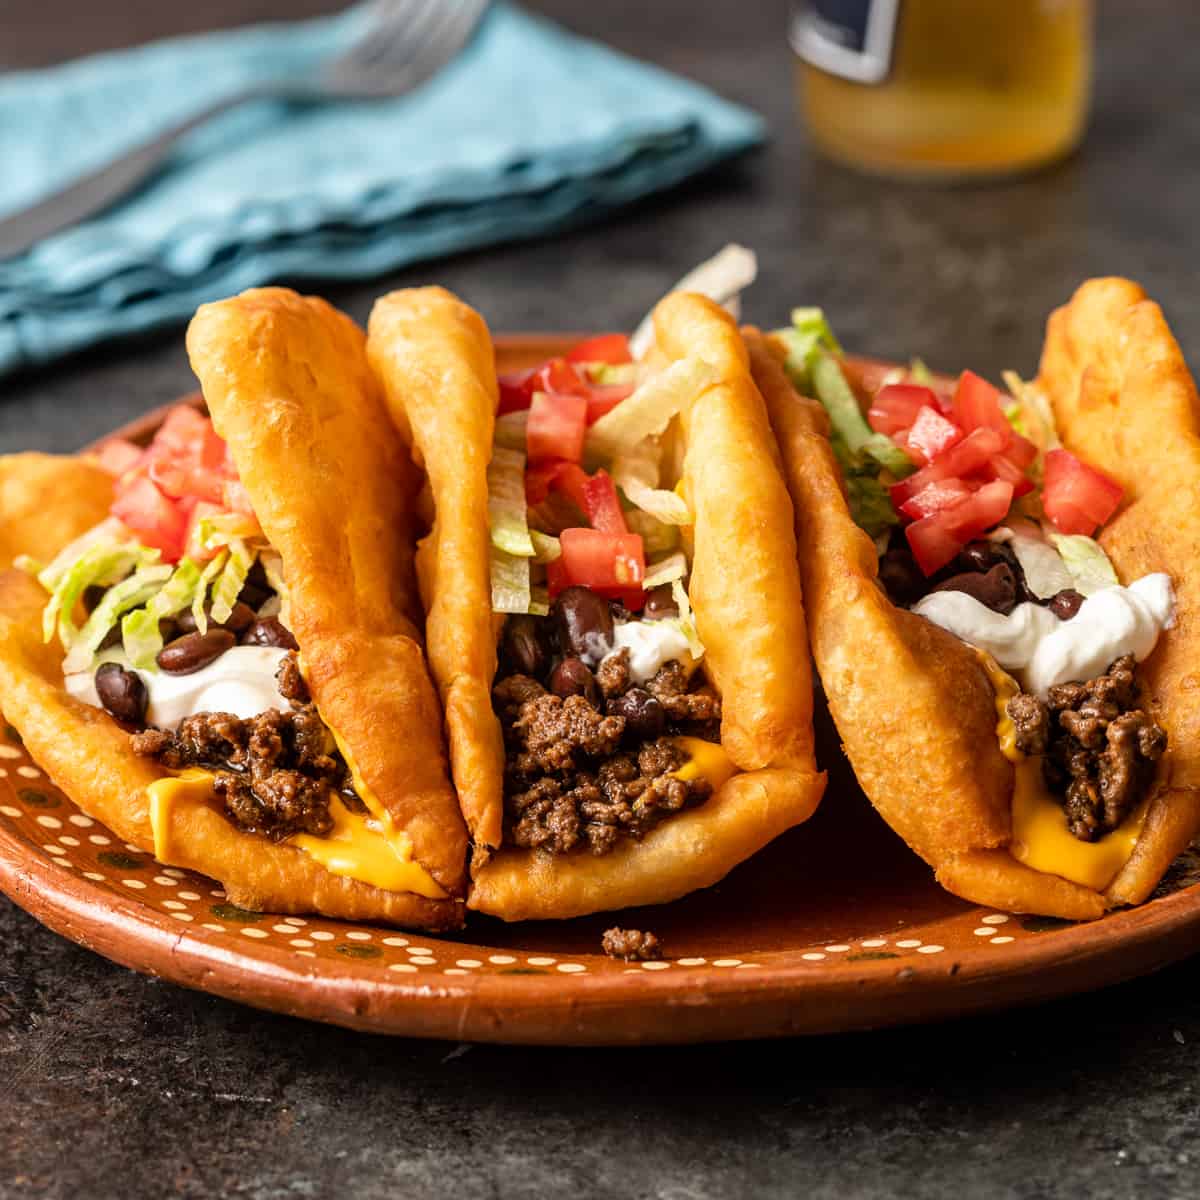 https://keviniscooking.com/wp-content/uploads/2022/08/Navajo-Tacos-Indian-Fry-Bread-square.jpg